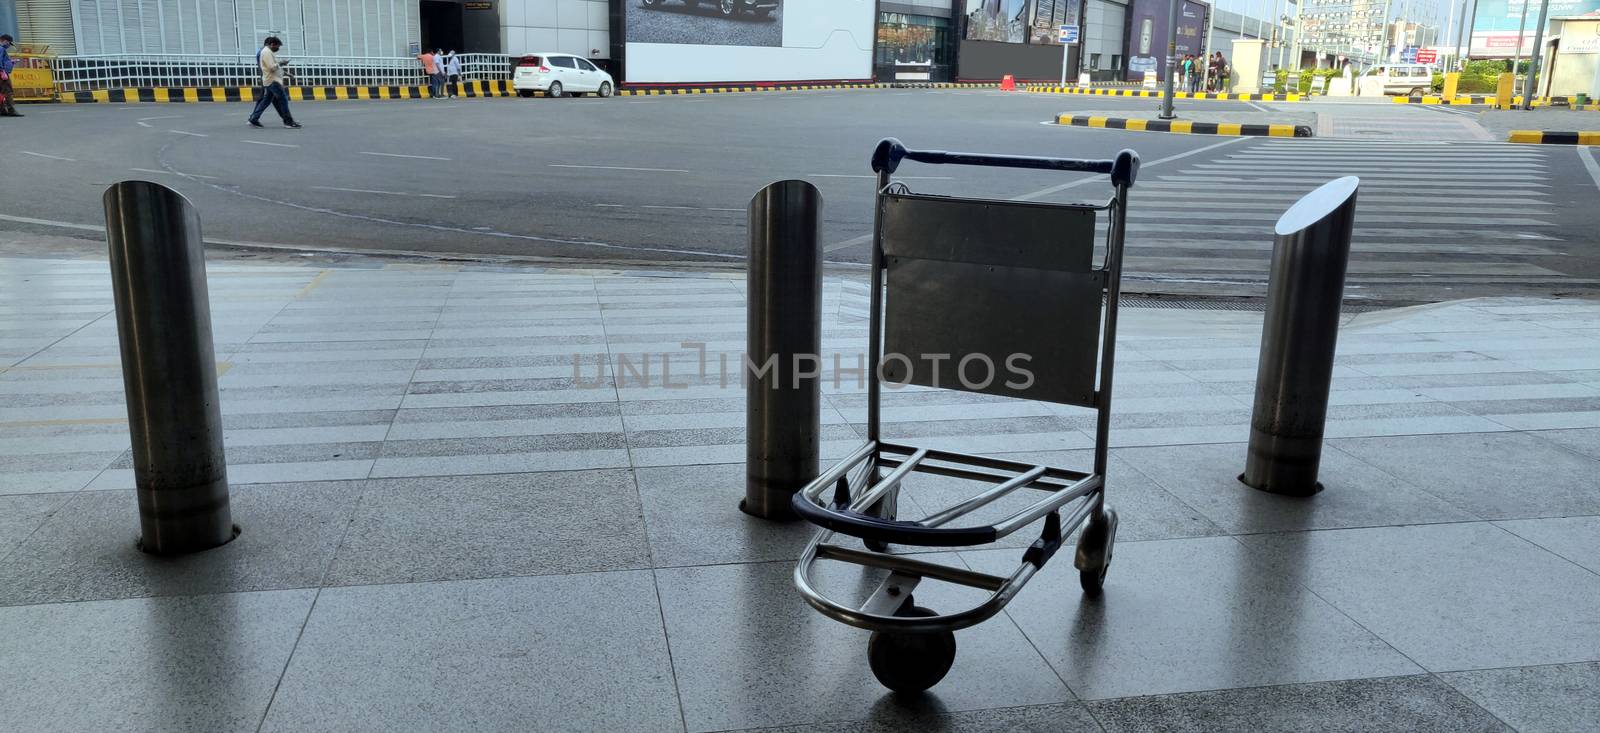 Abandoned and empty bag trolley at International airport of Delhi in June 2020 by mshivangi92